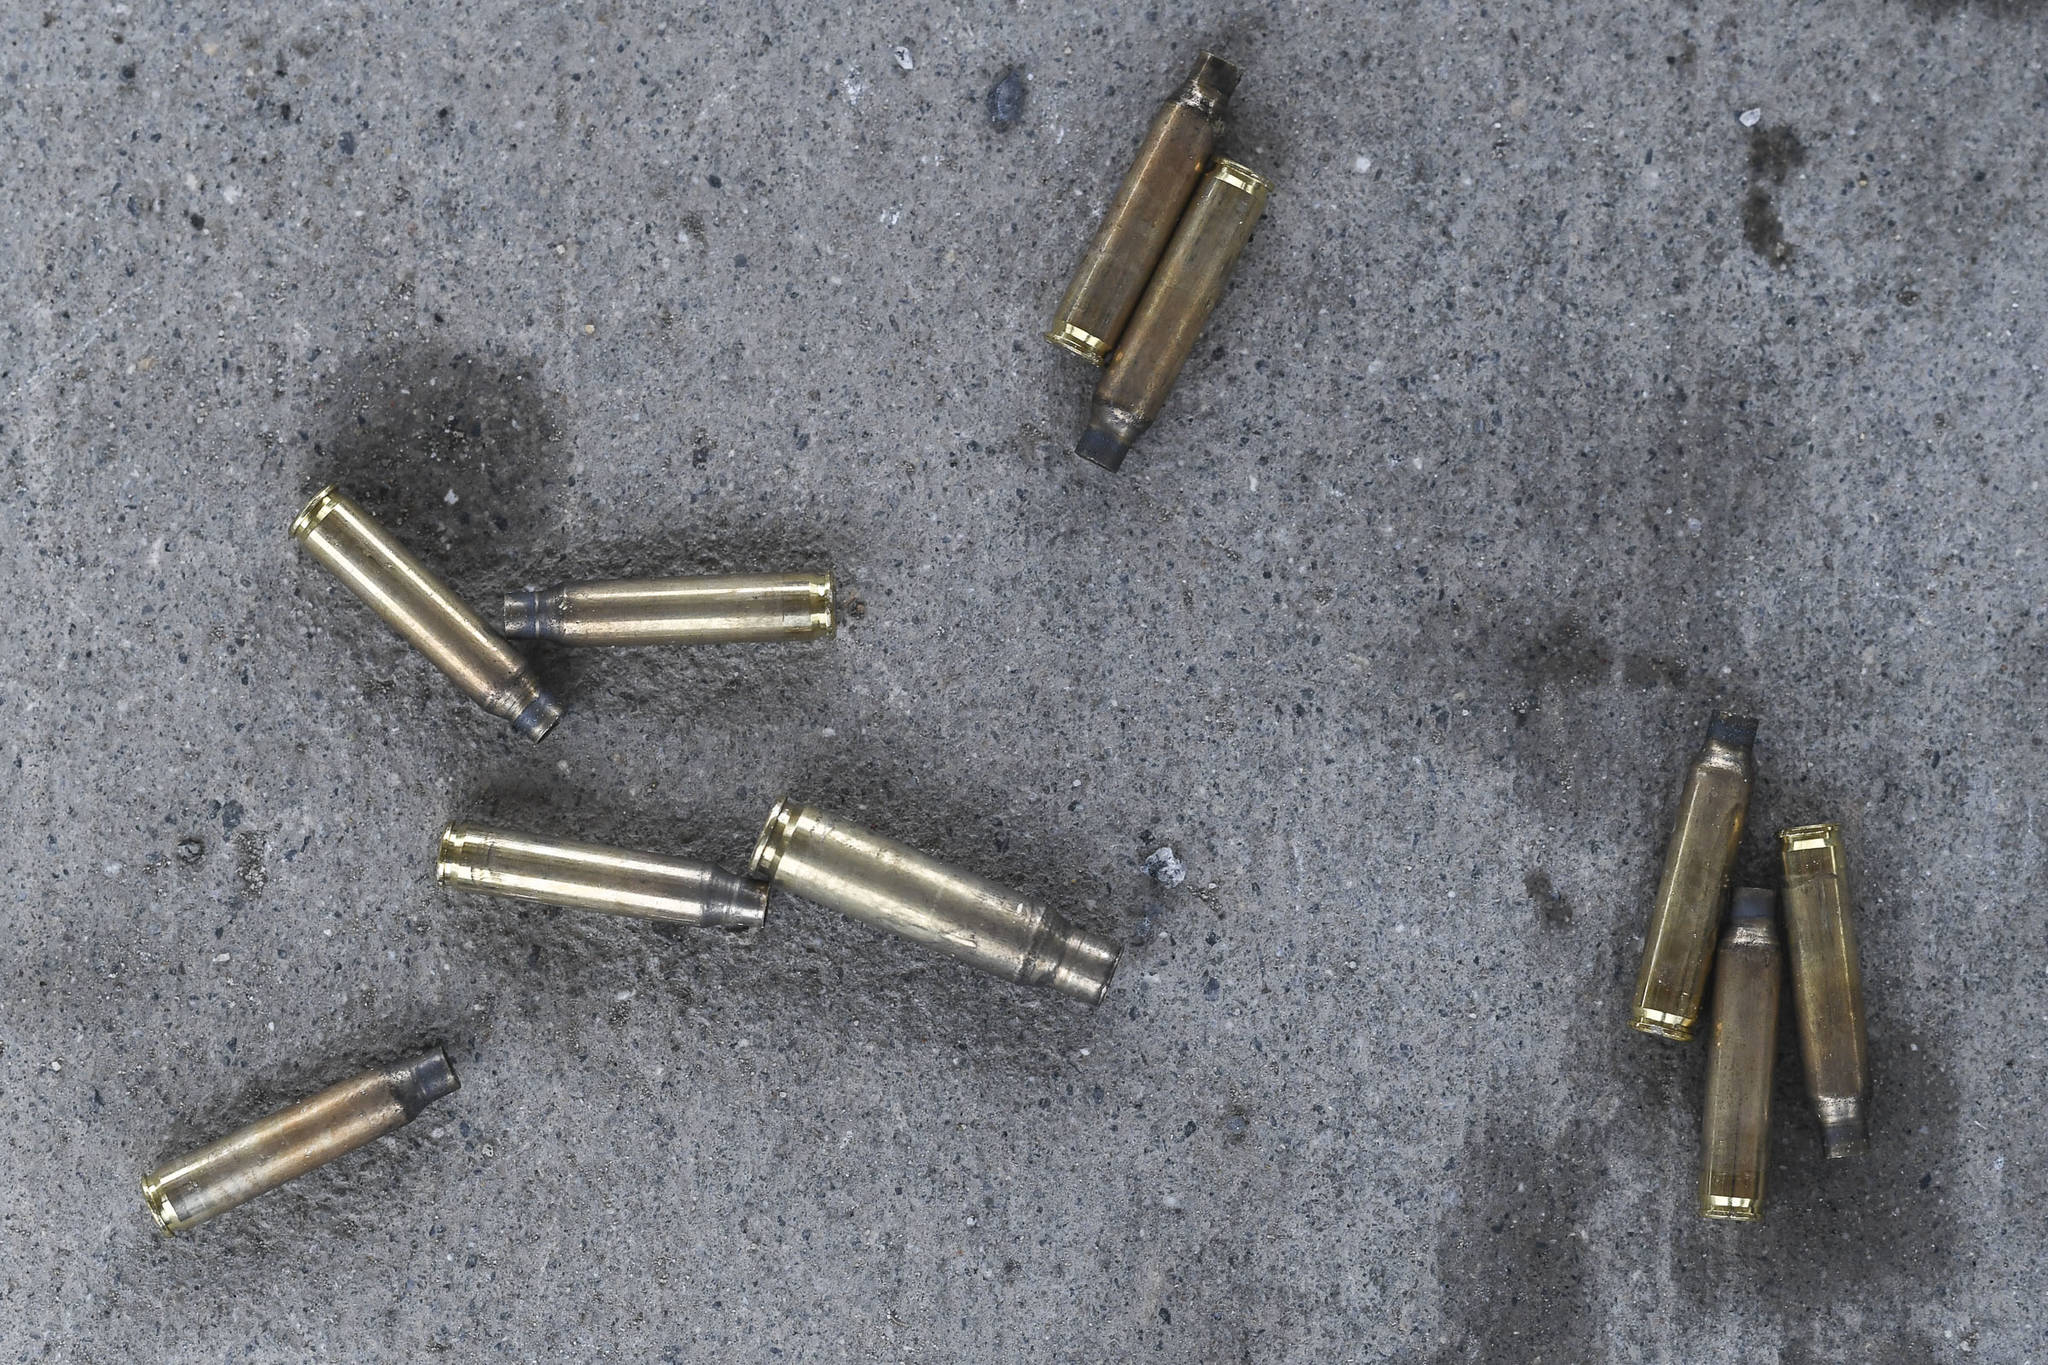 Spent bullet cases gather on the cement at the Hank Harmon Rifle Range on Montana Creek Road on Wednesday, Dec. 18, 2019. (Michael Penn | Juneau Empire)